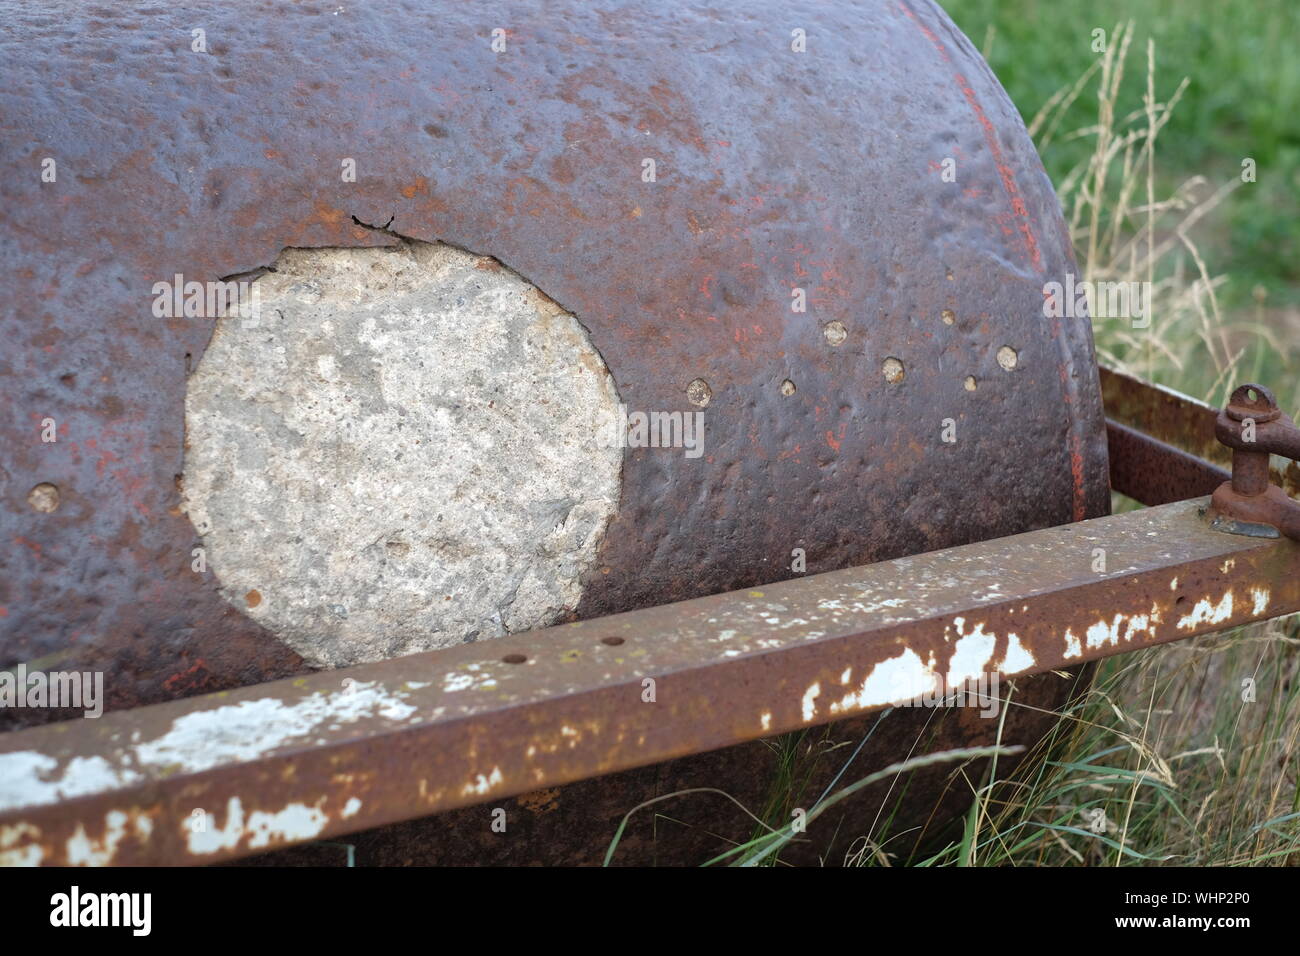 High Angle View Of Rusty Damaged Metallic Roller By Grass Stock Photo